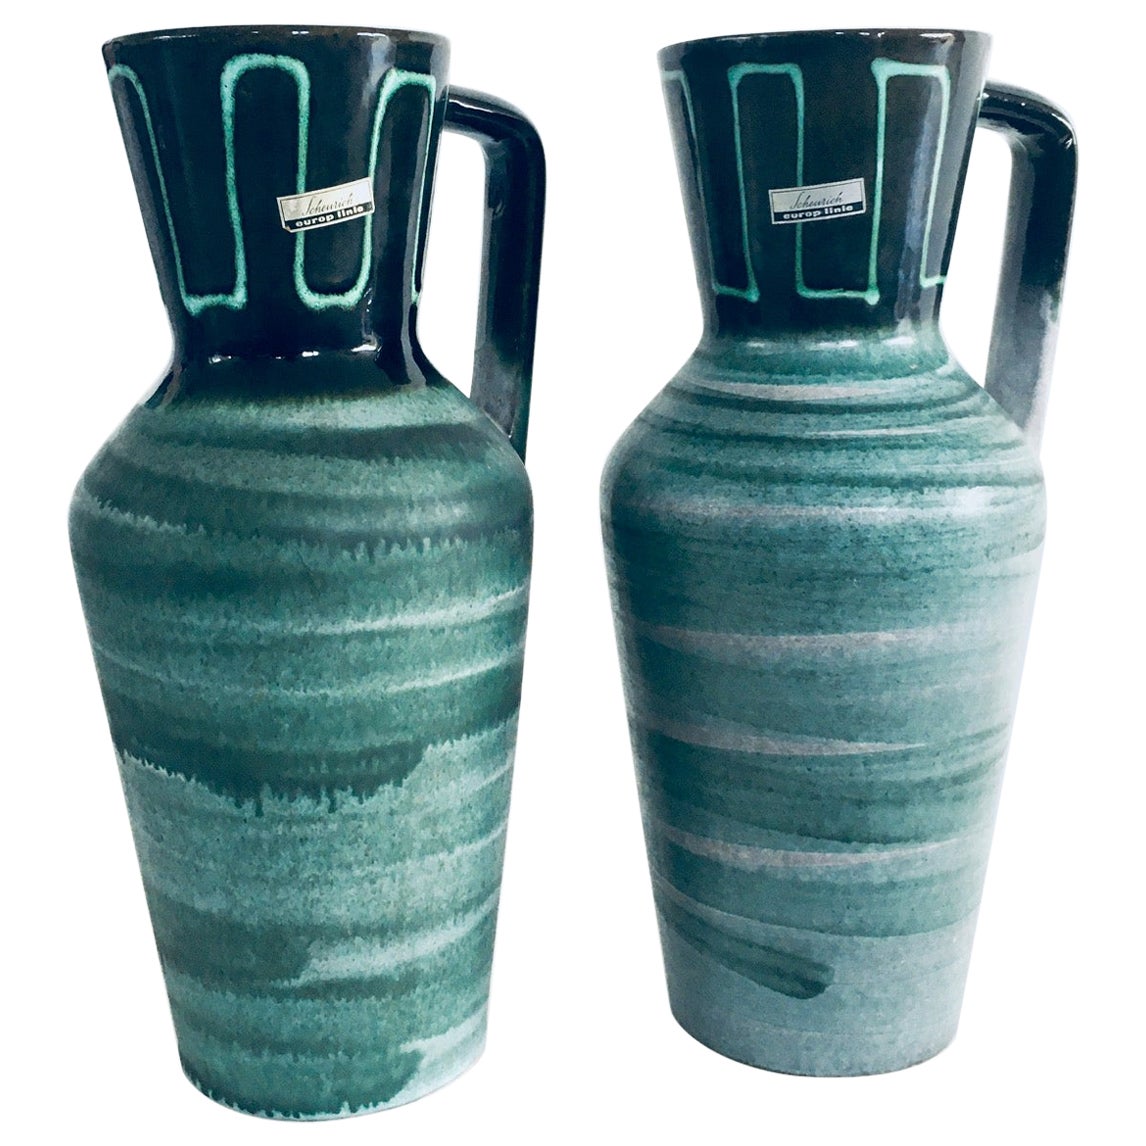 Midcentury Modern Studio Pottery Vase Set by Scheurich, West Germany 1960's For Sale